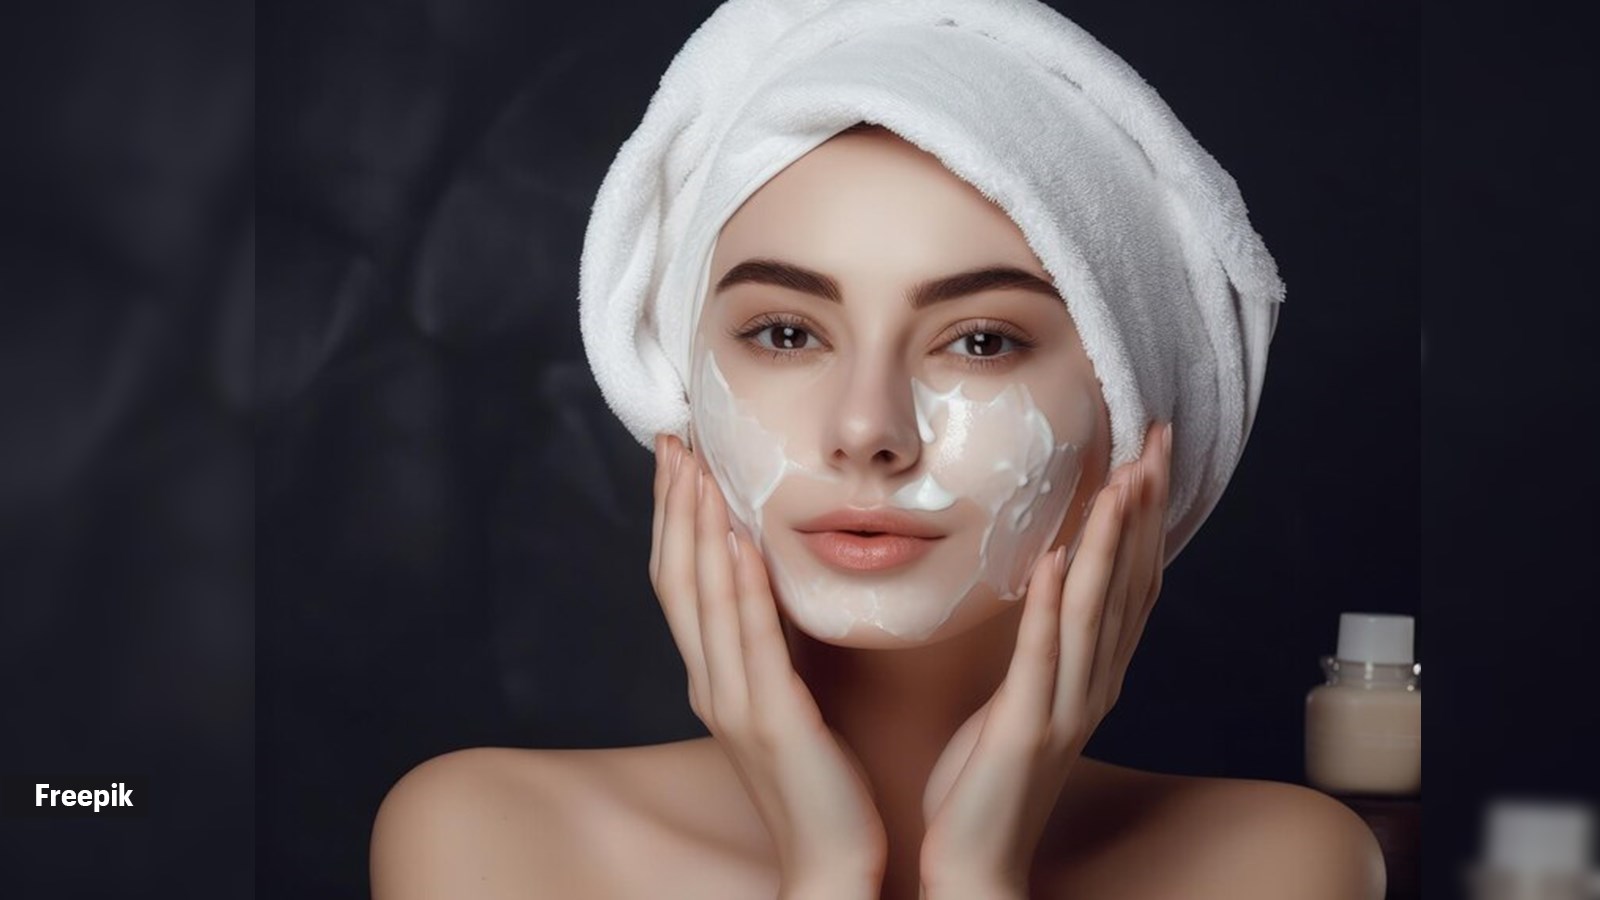 Sagging skin and skin care trends